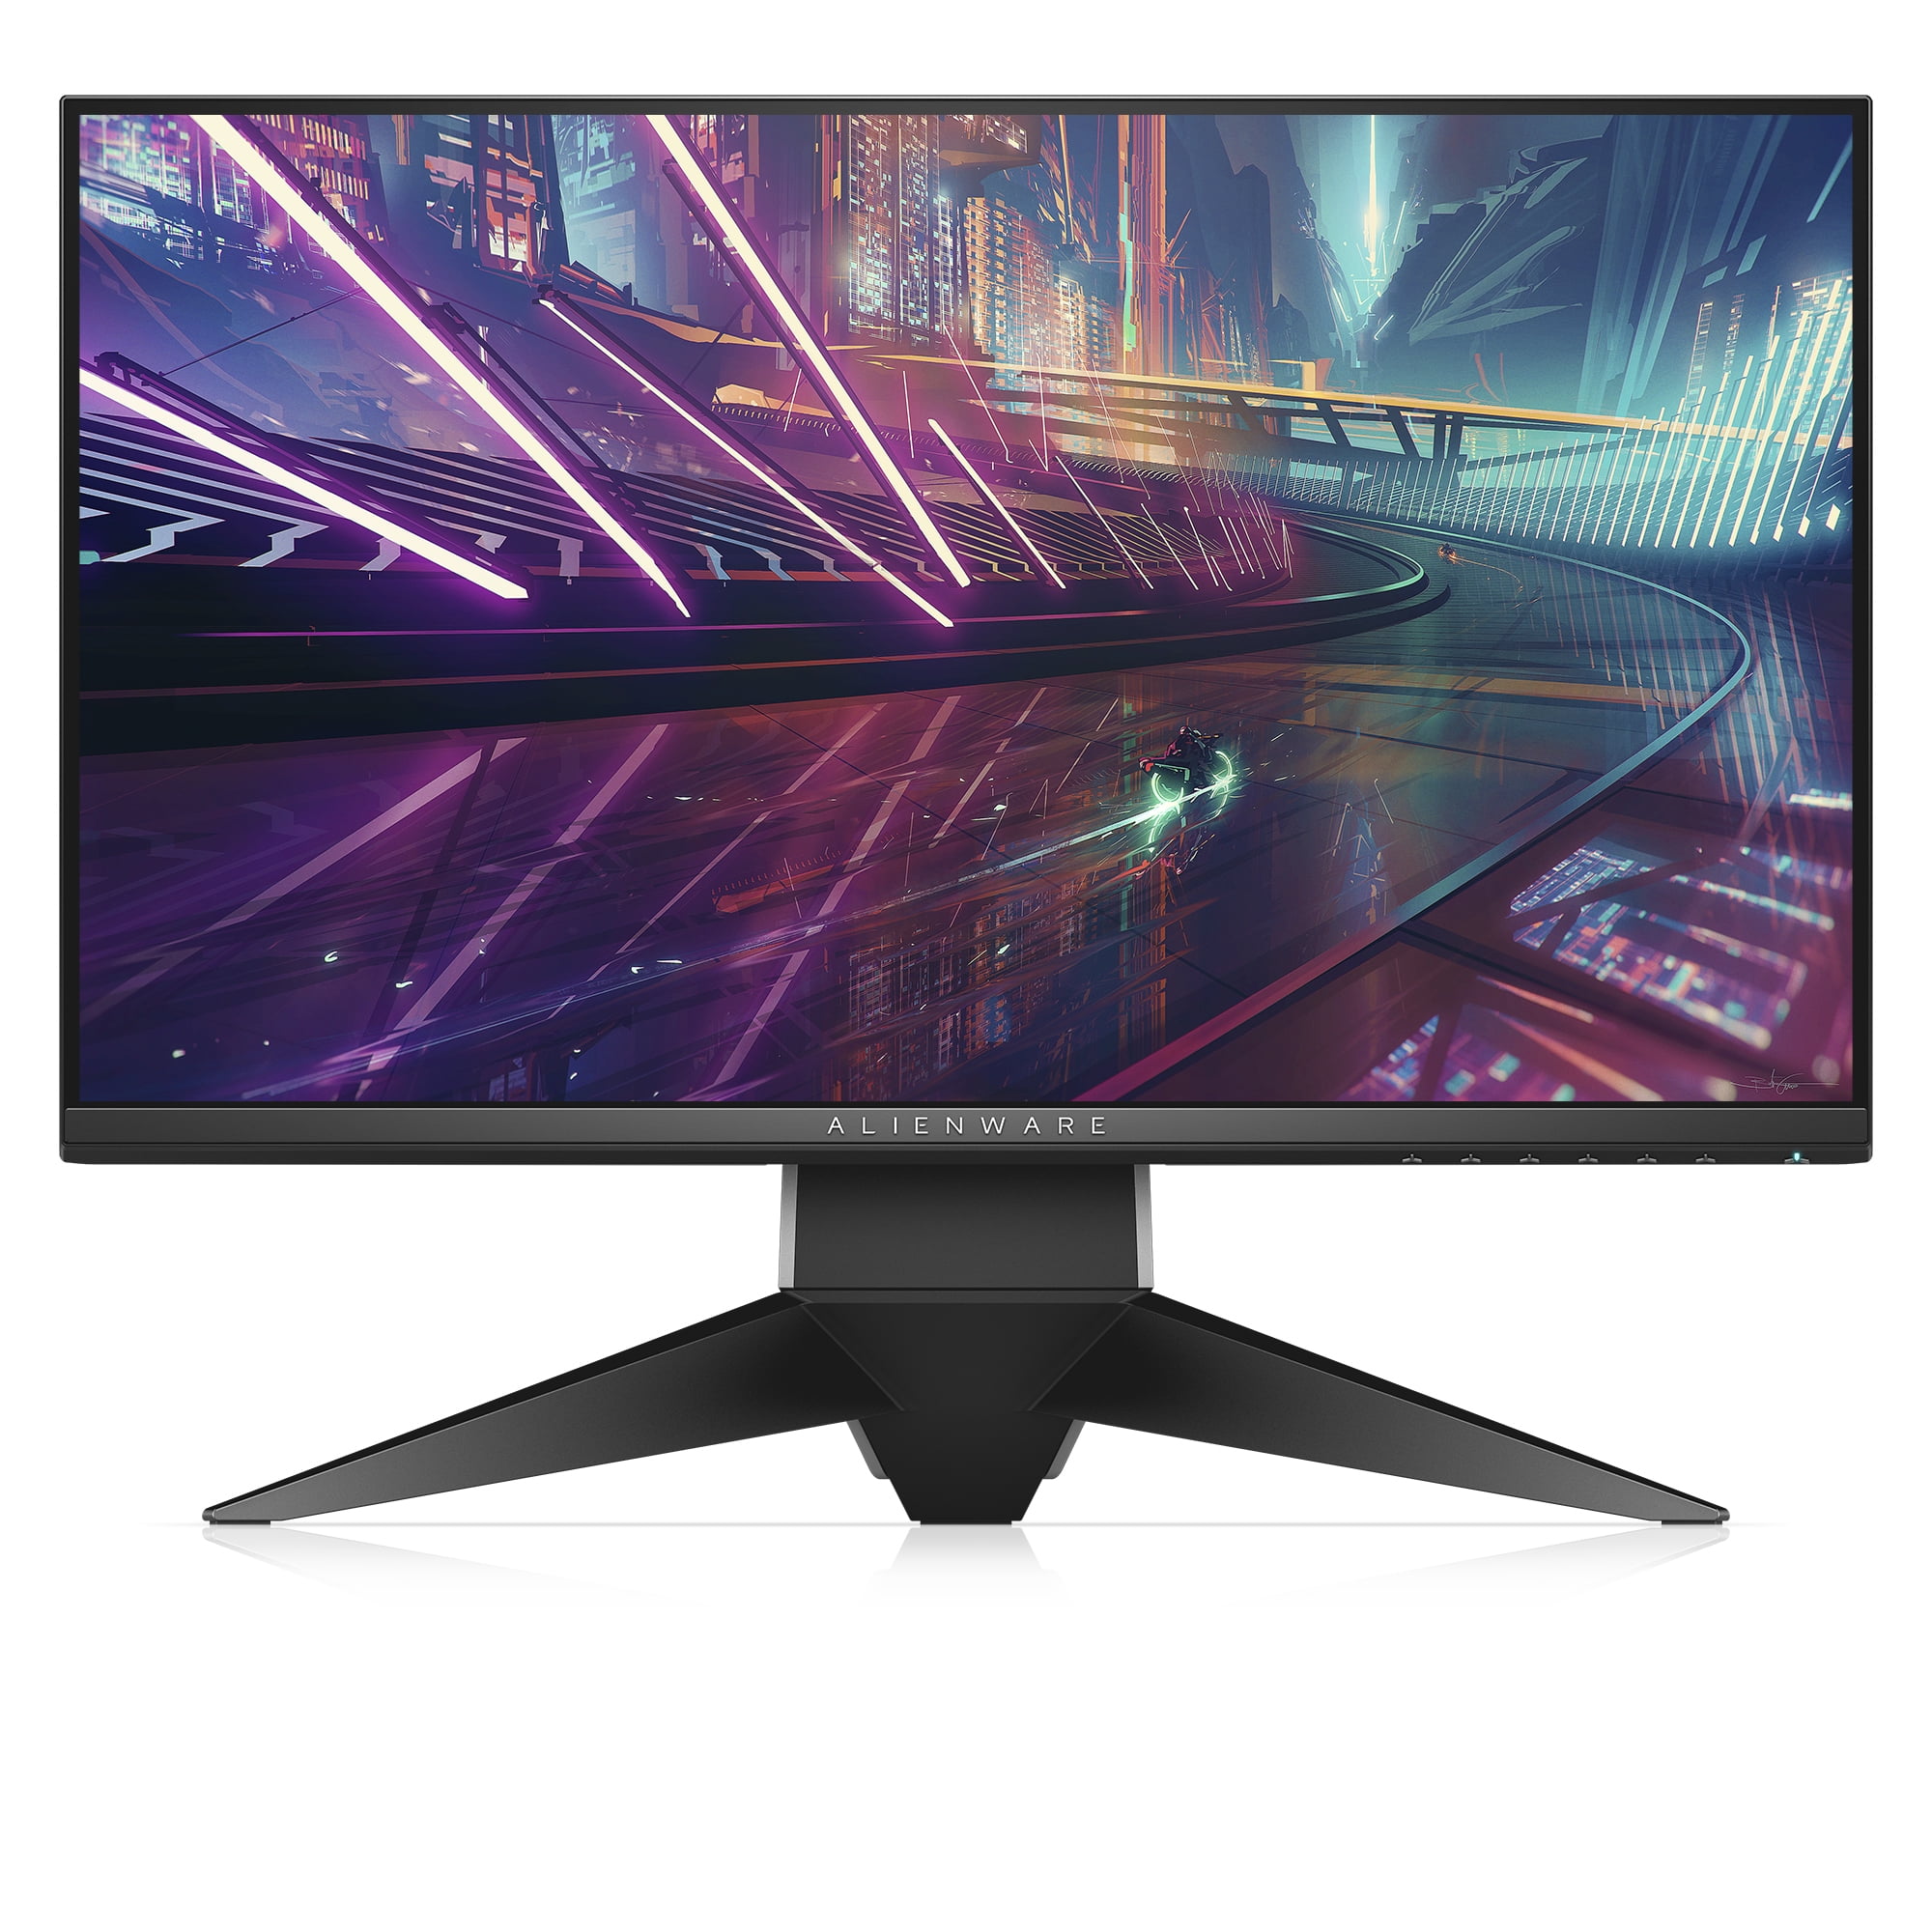 This 360Hz Alienware gaming monitor is less than half price right